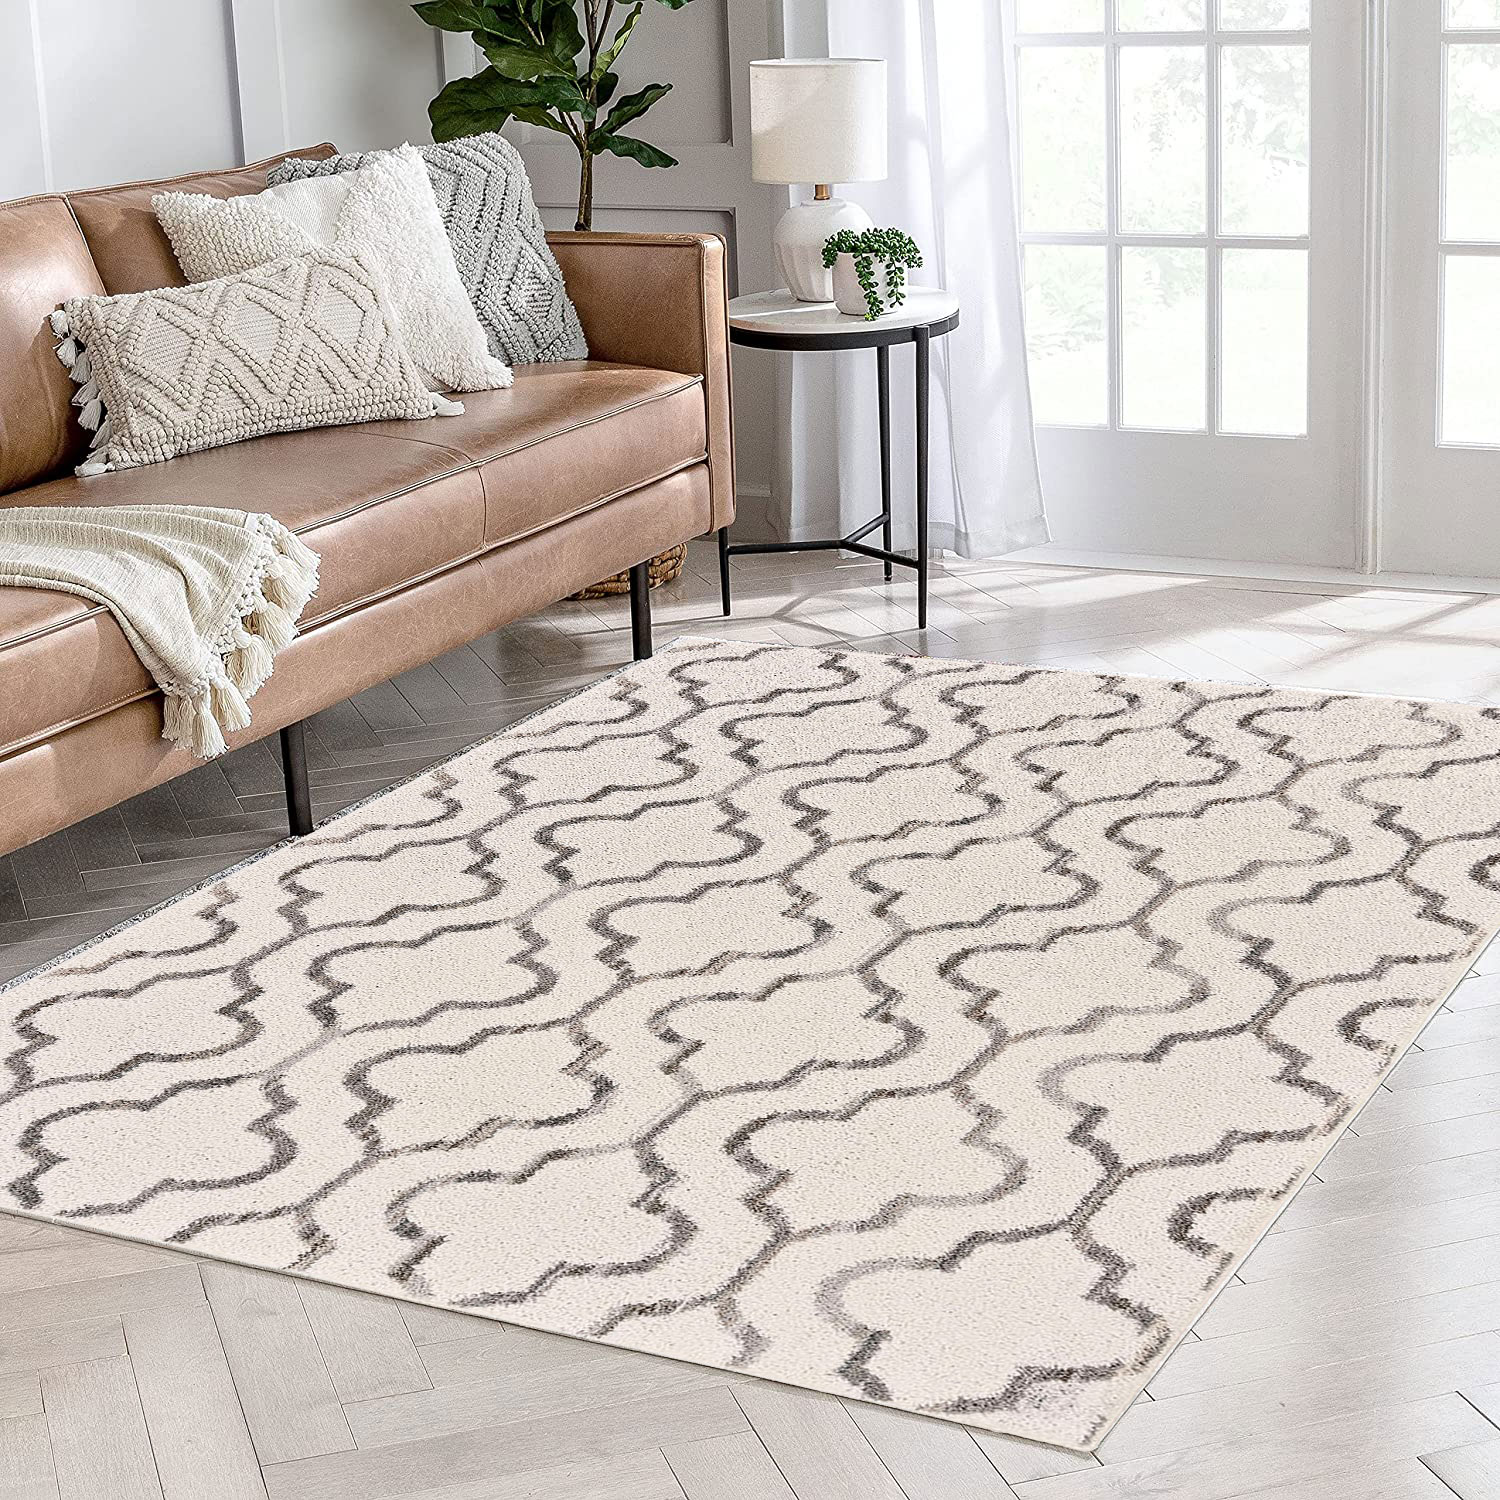 FUN PACK Collection - Indoor decorative rug, 48x60